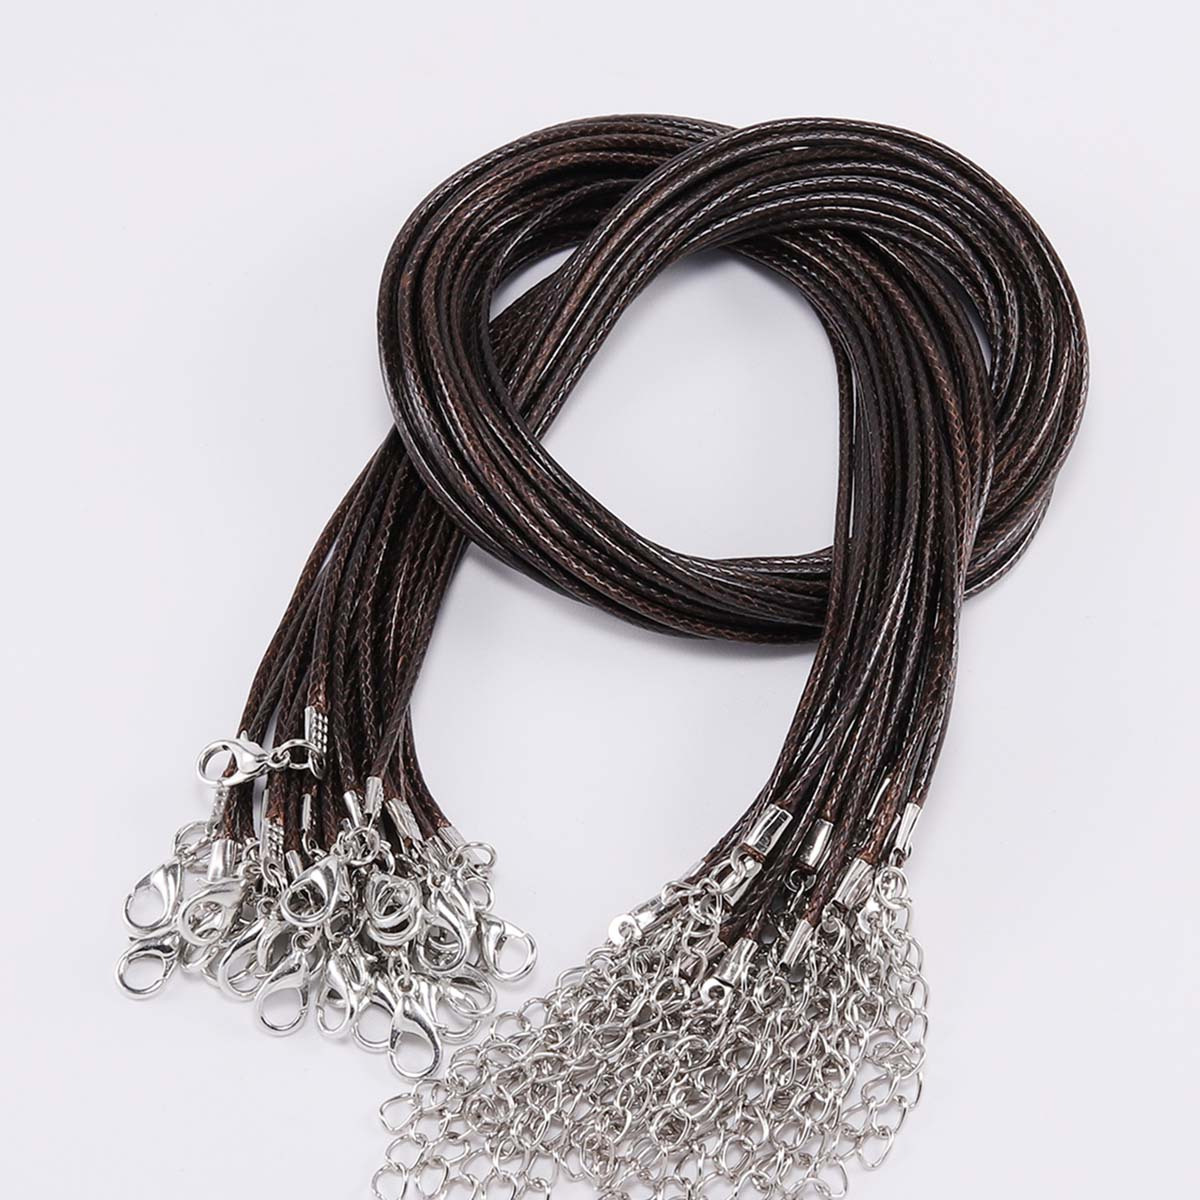 Mandala Crafts Brown Korean Wax Necklace Cord with Clasp Bulk 100 PCs -  Necklace String for Jewelry Making Supplies – 18 Inches Rope Necklace Cords